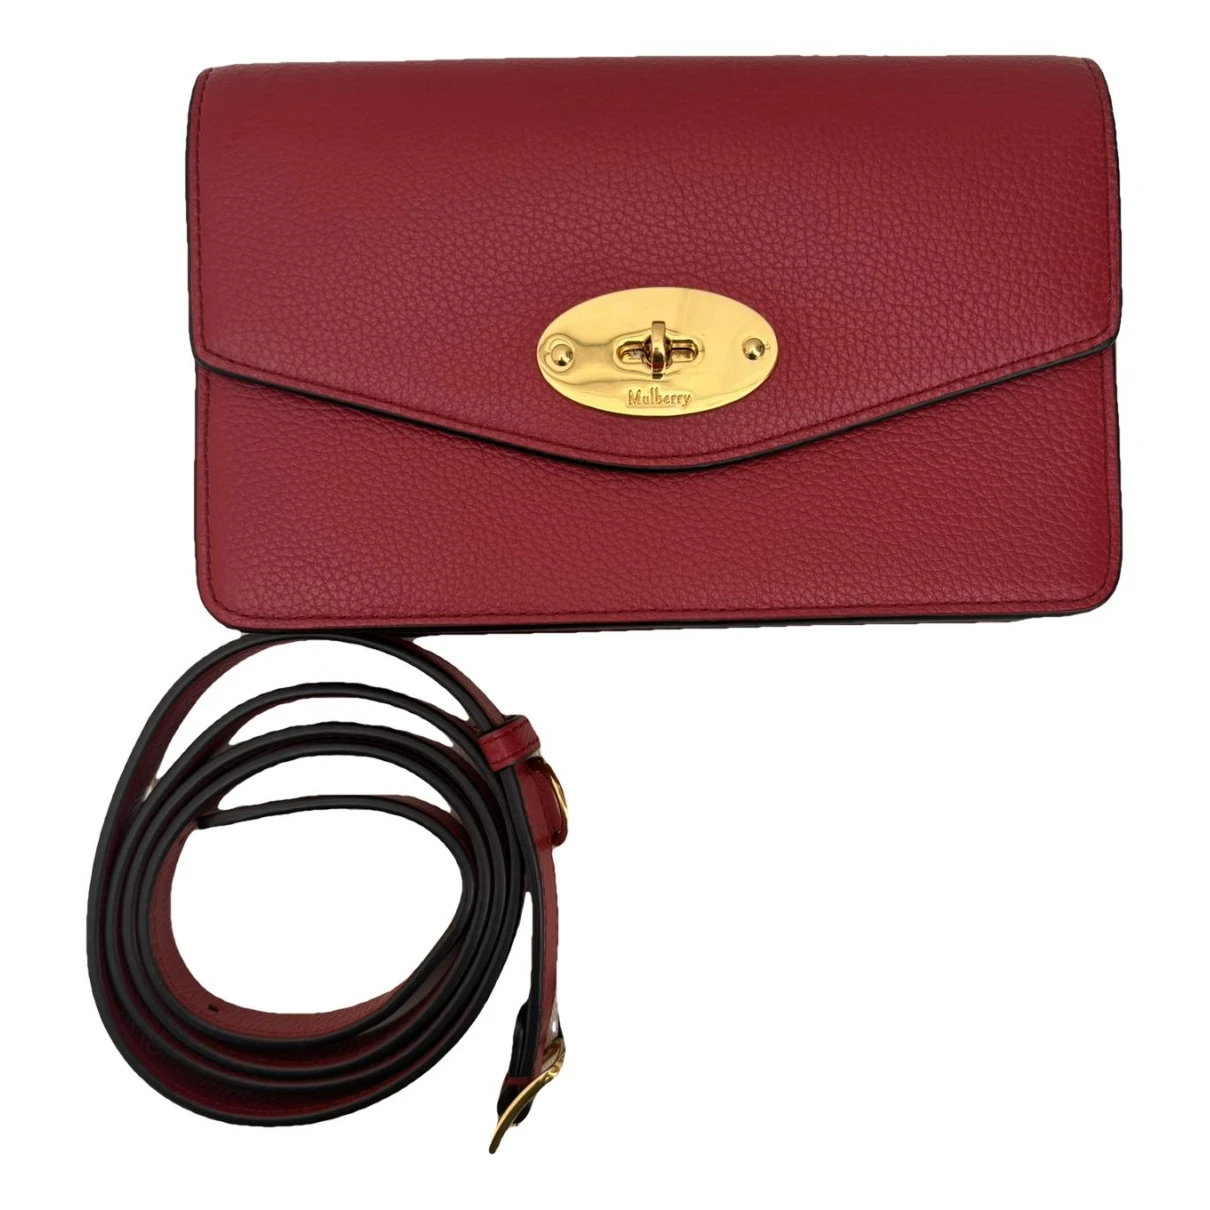 Pre-owned Mulberry Darley Leather Handbag In Red